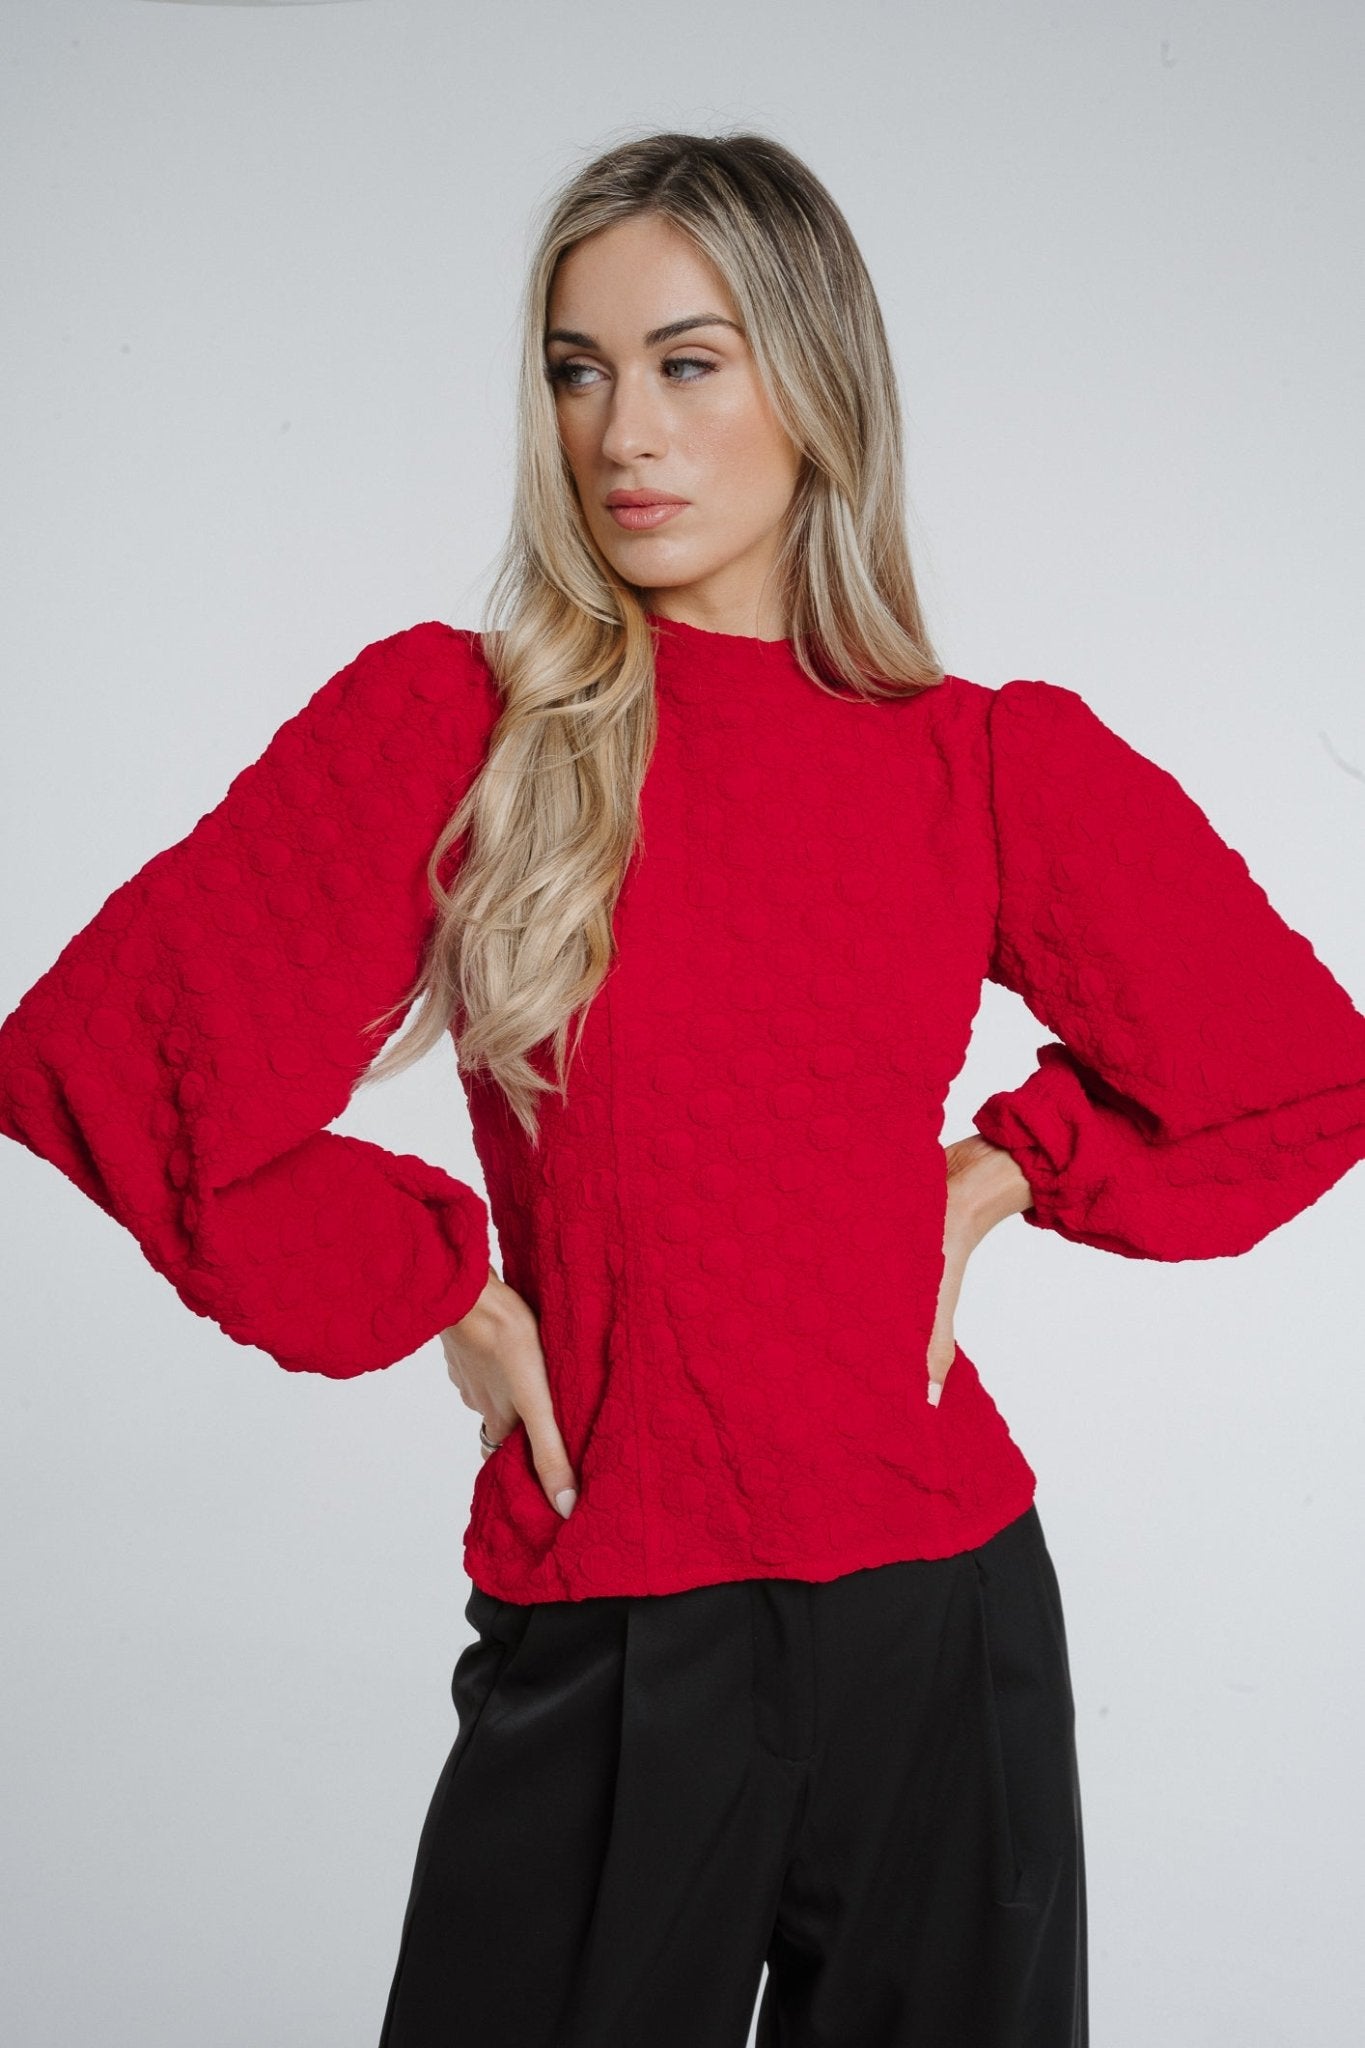 Paige Textured Top In Red - The Walk in Wardrobe